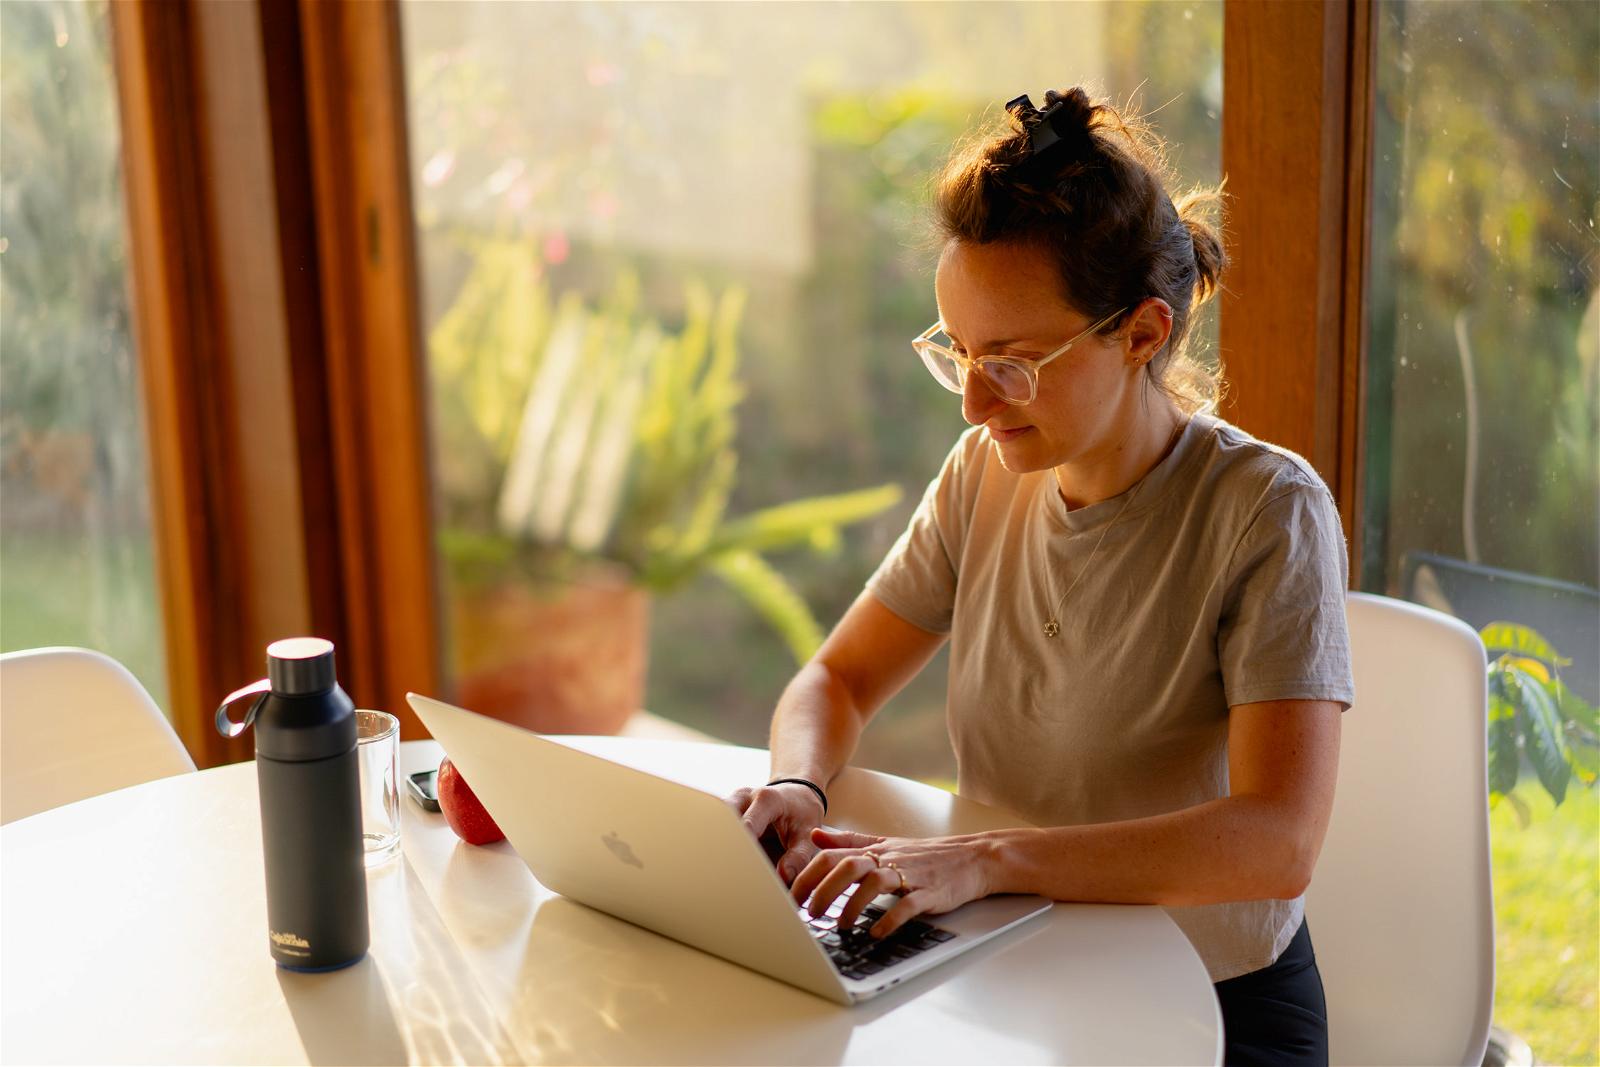 14 Pros and Cons of the Digital Nomad Lifestyle (Work Remotely)